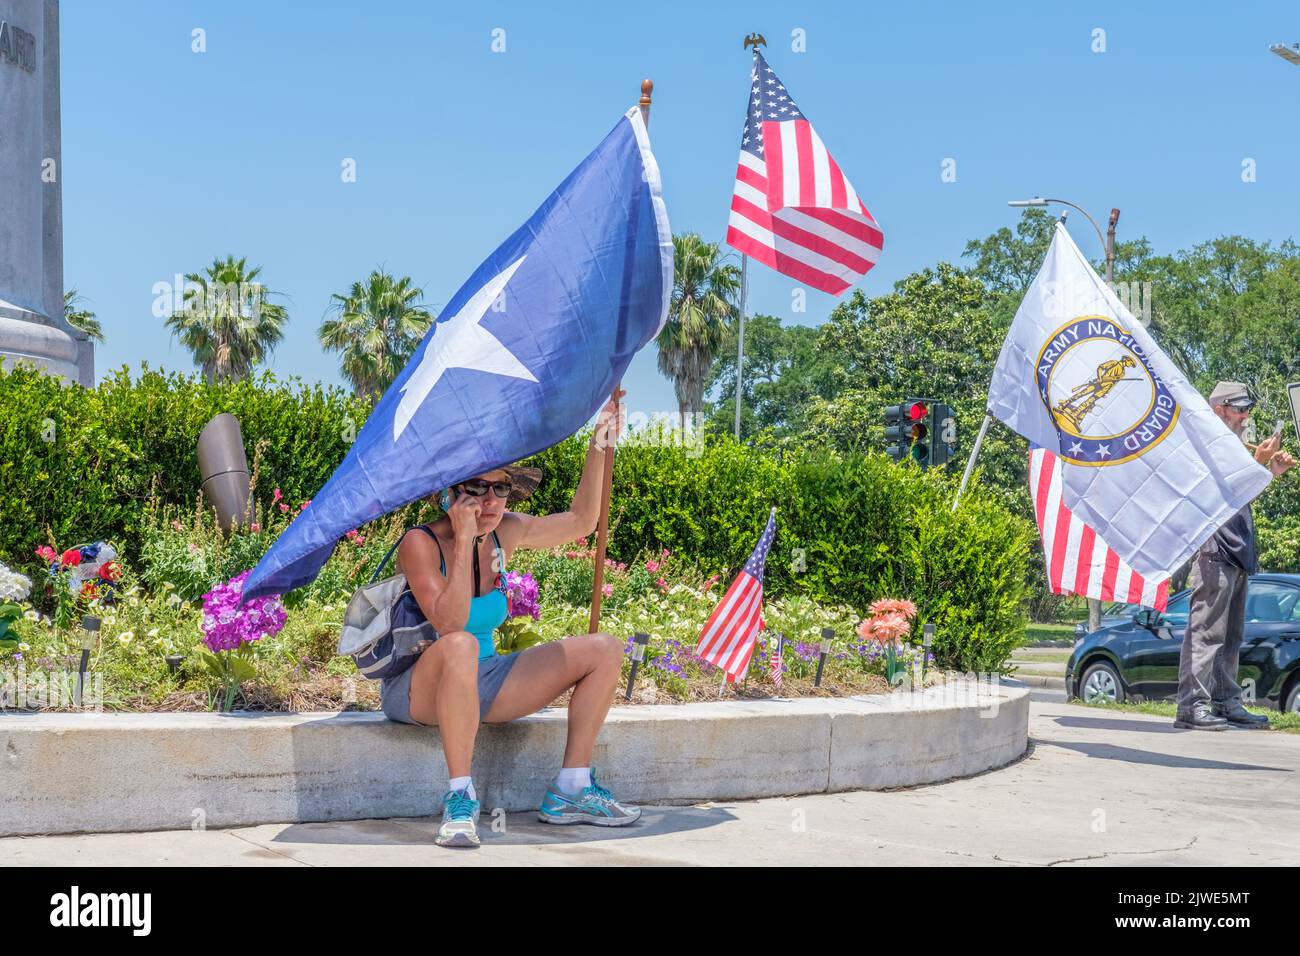 NEW ORLEANS, LA, USA-MAY 7, 2017: Woman Demonstrator with Texas Flag Protesting the Removal of Confederate Statues at Beauregard Statue near City Park Stock Photo